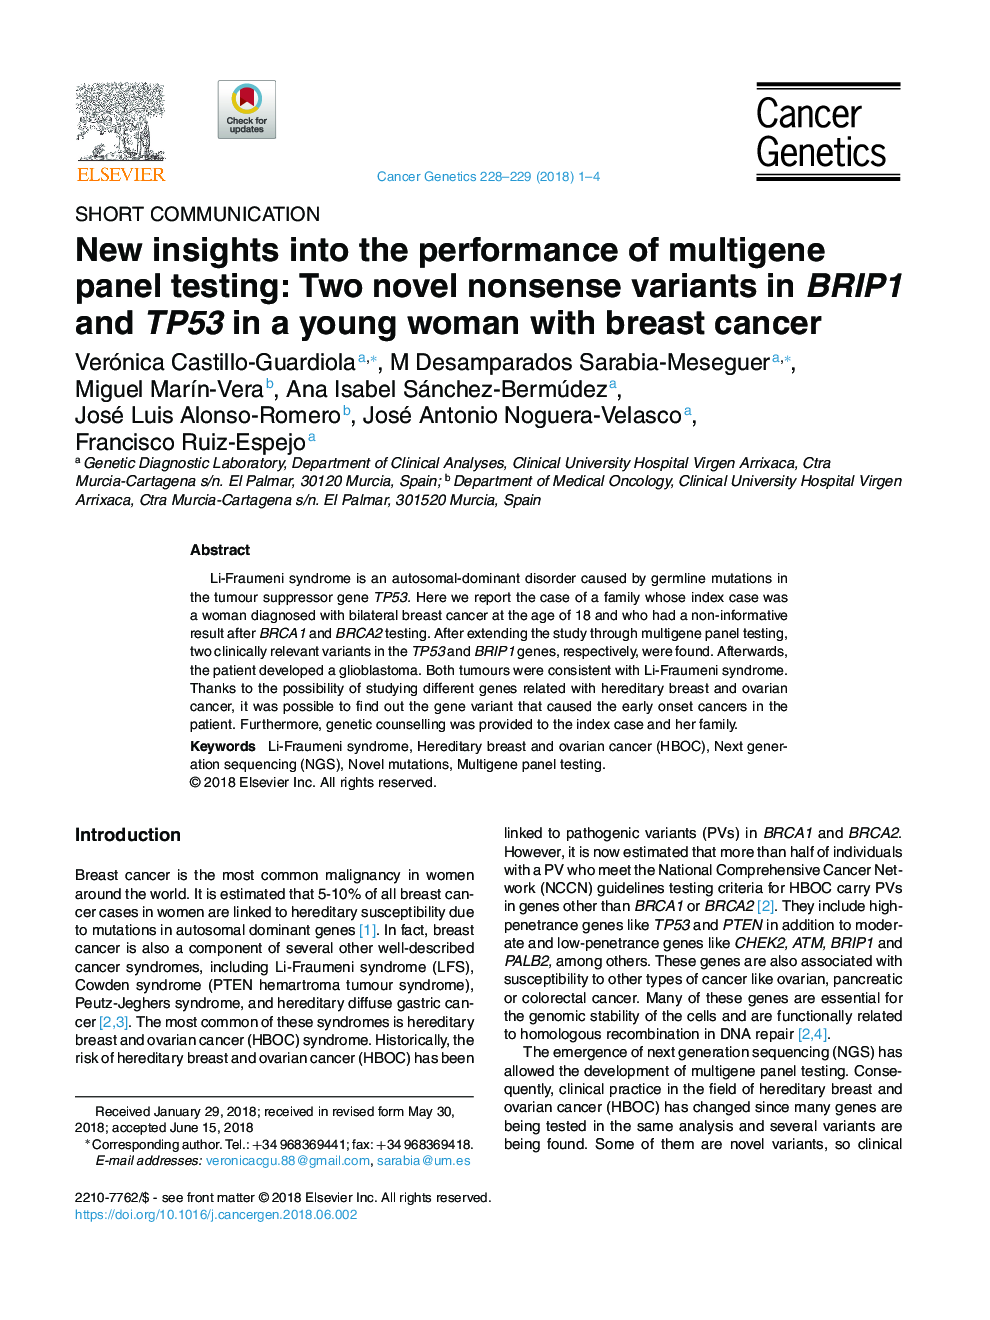 New insights into the performance of multigene panel testing: Two novel nonsense variants in BRIP1 and TP53 in a young woman with breast cancer